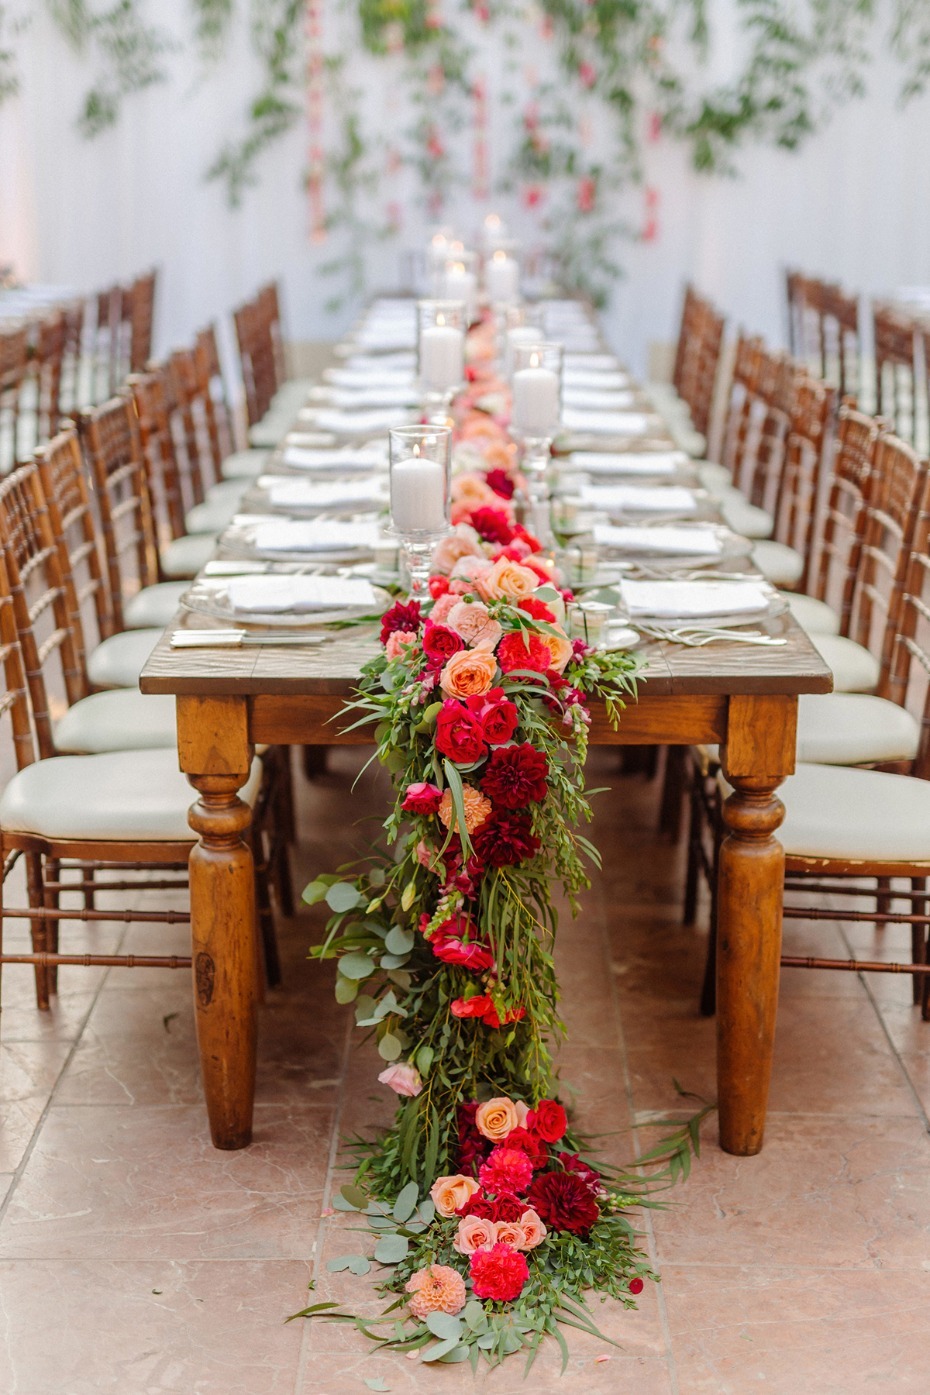 10 Tablescapes You Have to See